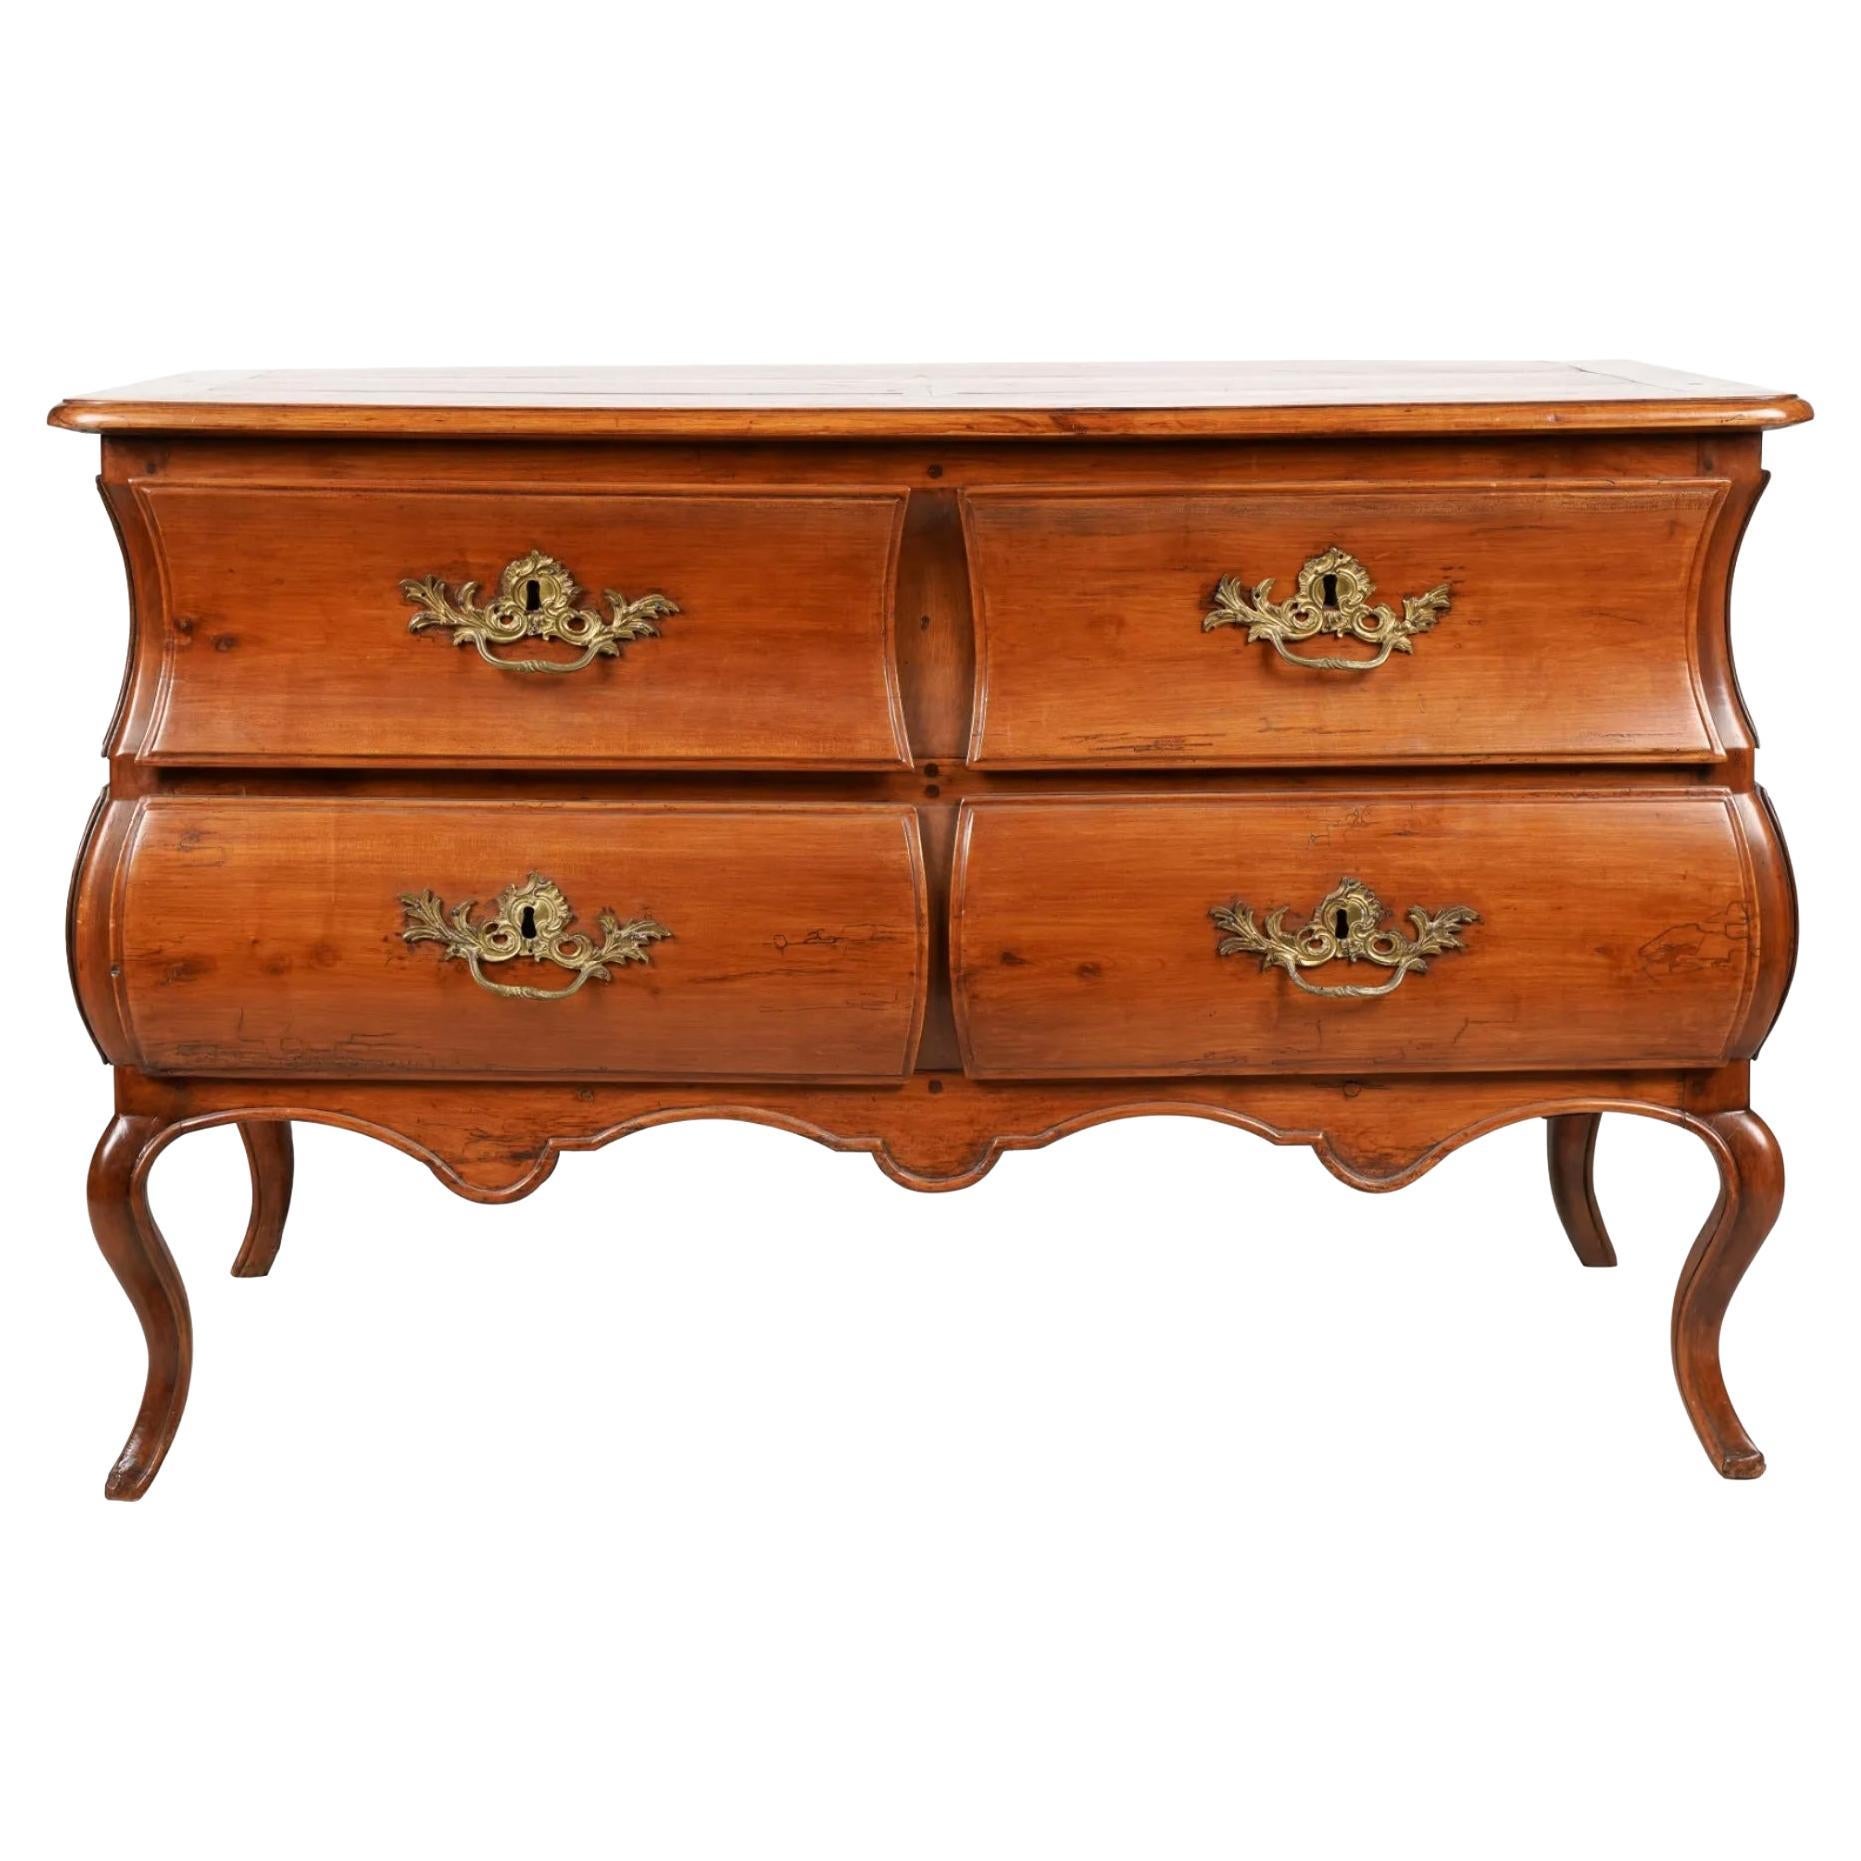 Early 19th Century French Provincial Walnut Bombe Commode